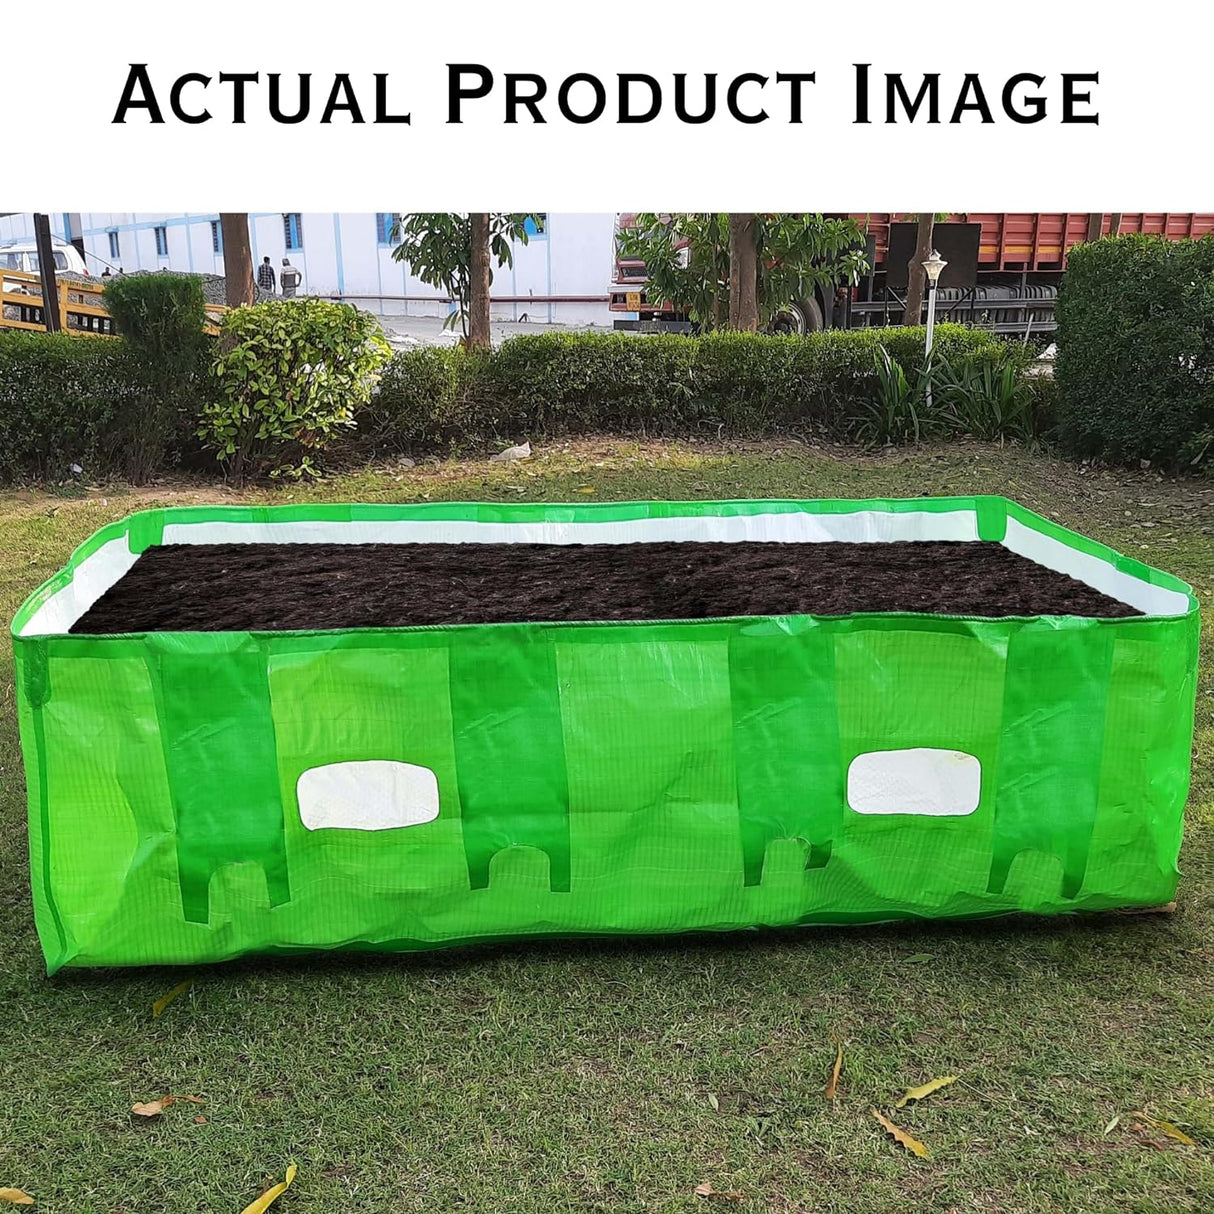 Singhal HDPE UV Stabilized Vermi Compost Bed 480 GSM, 8x4x2 Ft, 100% Virgin Quality Material, Green and White, Vermibed Agro Vermicompost Bed (Vermi Bed), Agro Vermi Compost Making Bed